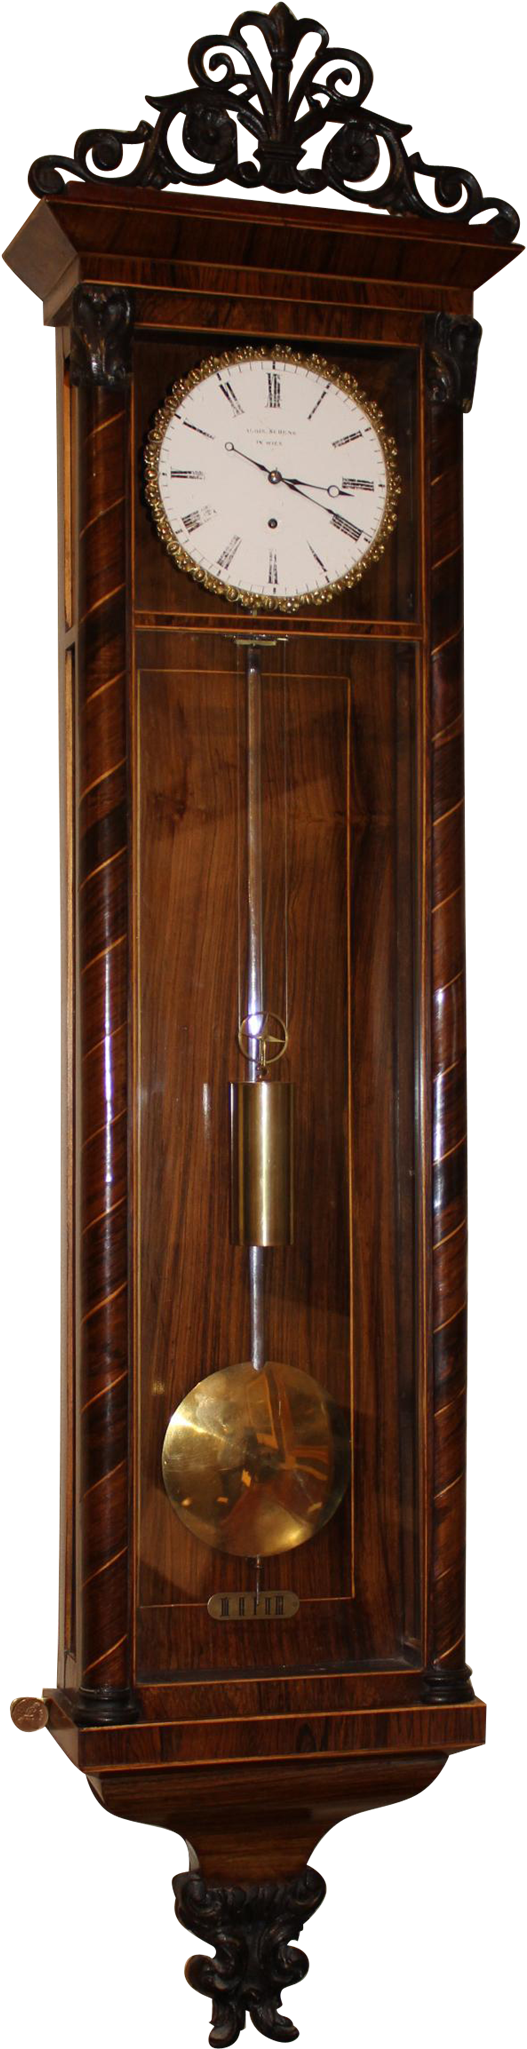 A Wooden Wall With A Glass Door